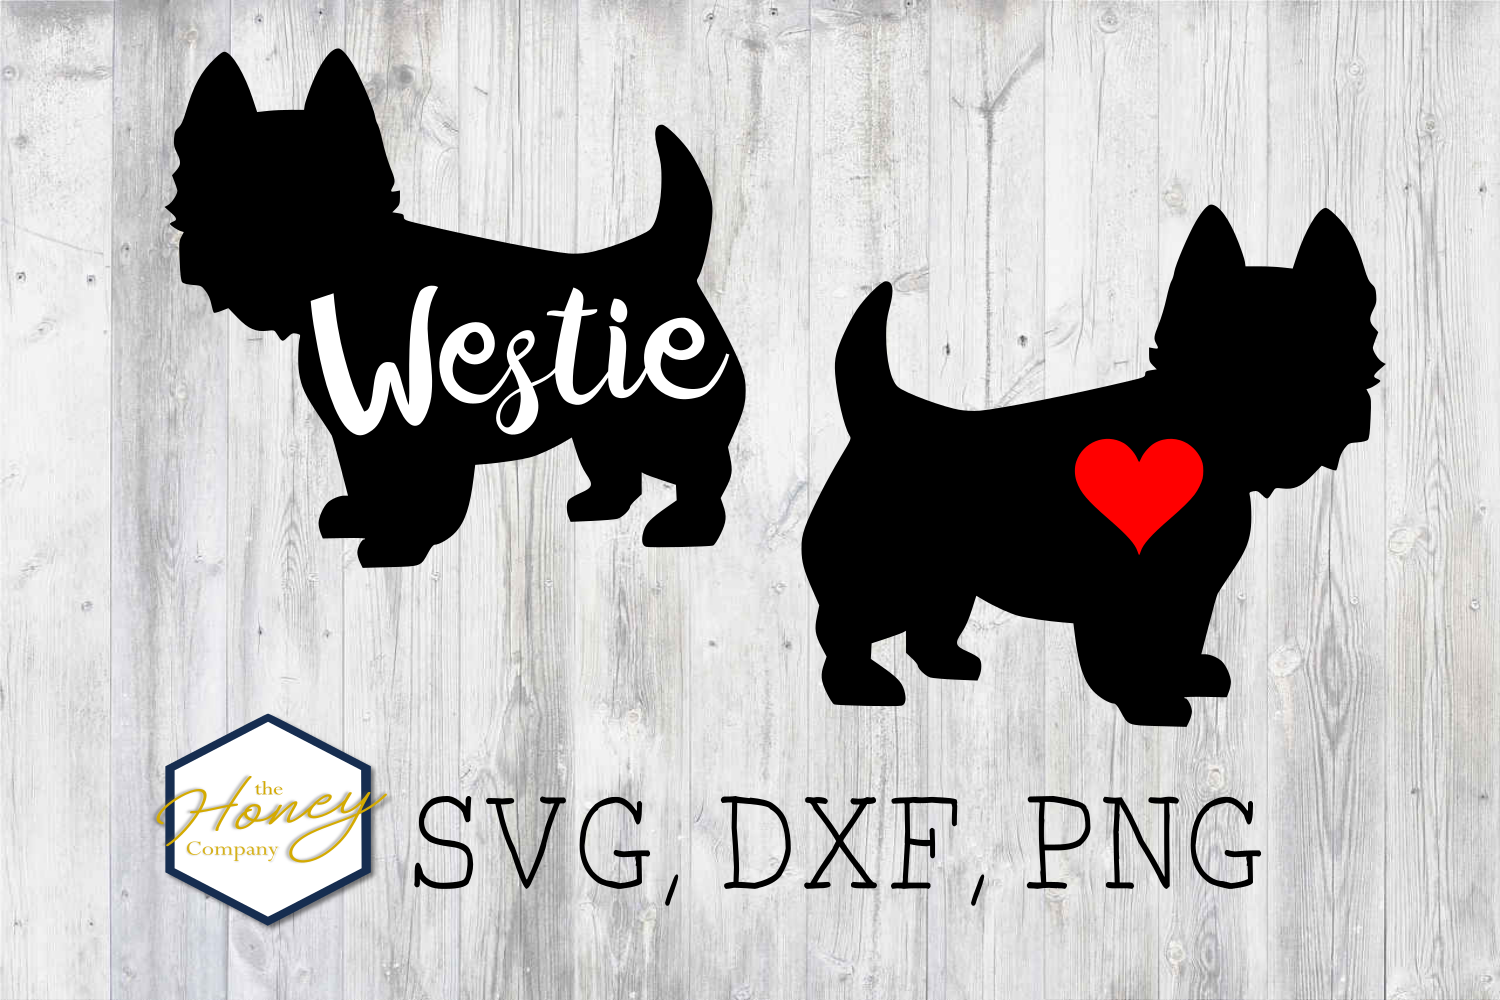 Westie SVG PNG DXF Dog Breed Lover Cut File Vector (277651) | Cut Files